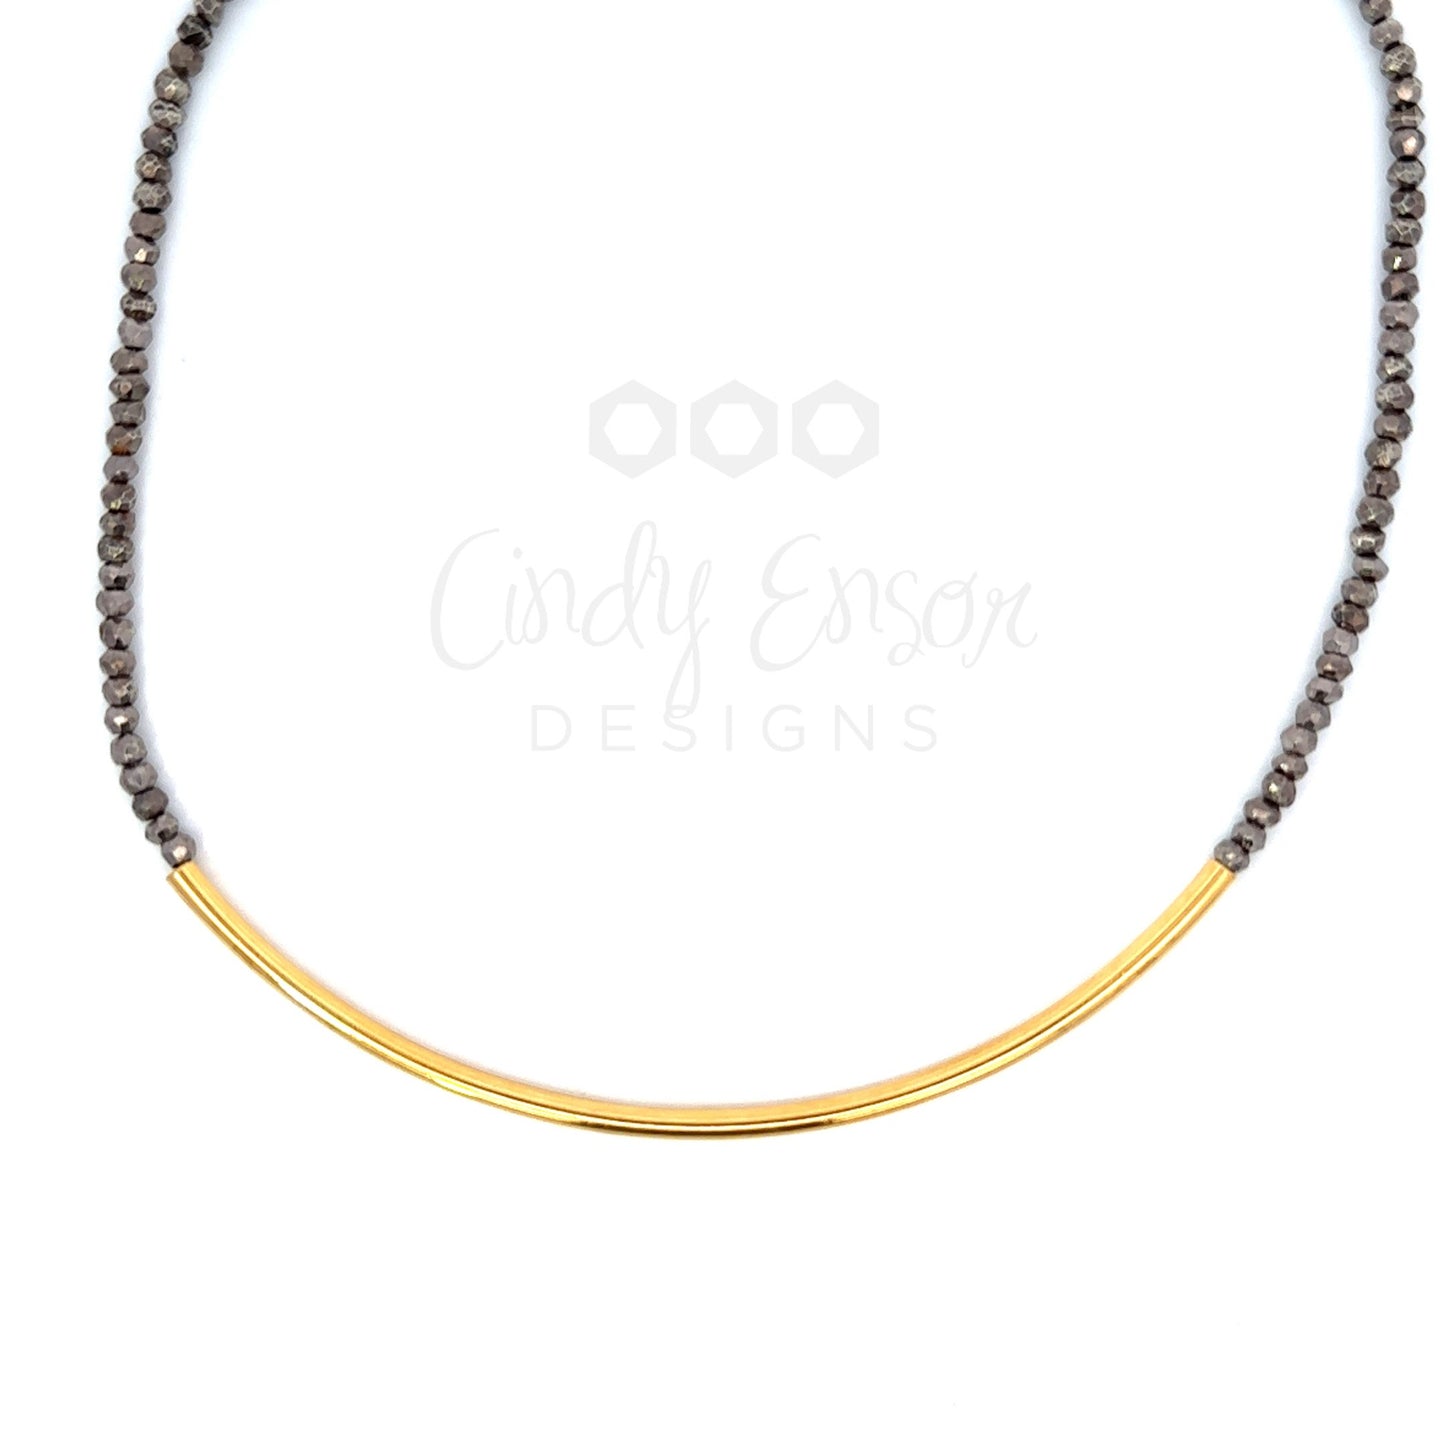 Strung Pyrite Necklace with Bar